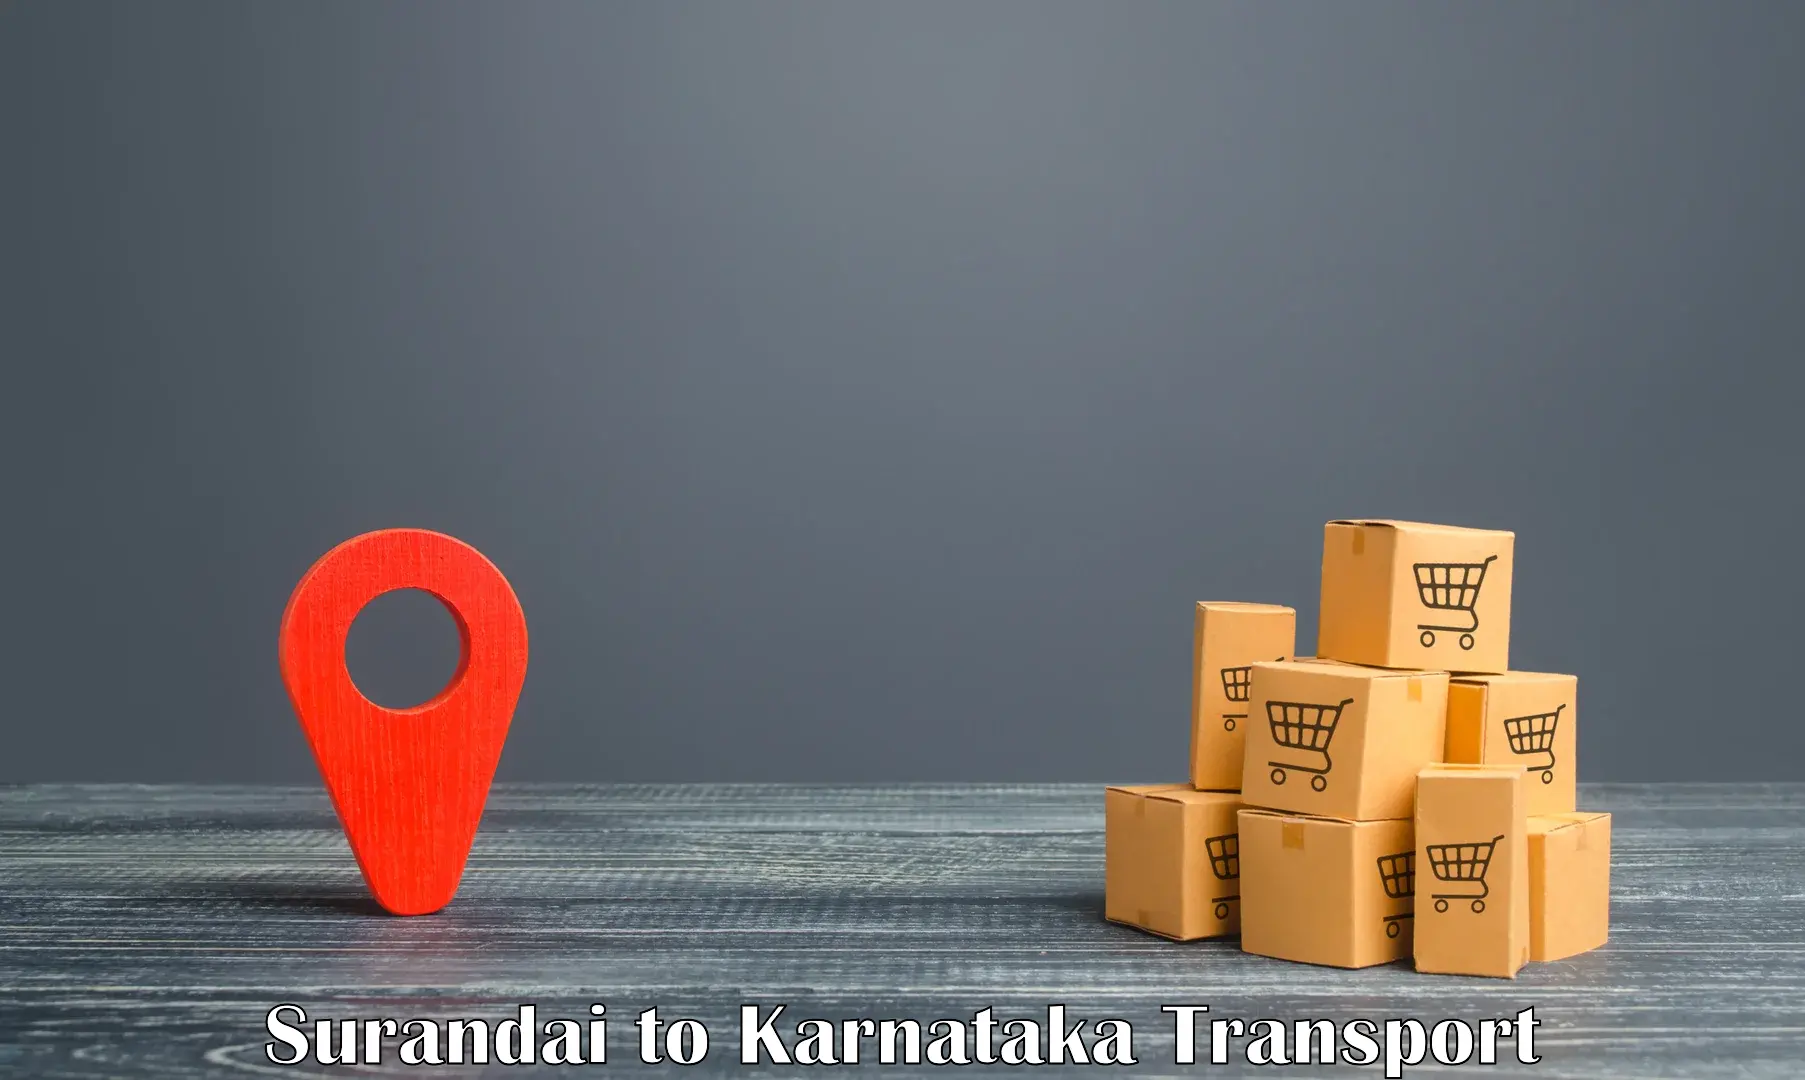 Nearby transport service Surandai to Kollegal